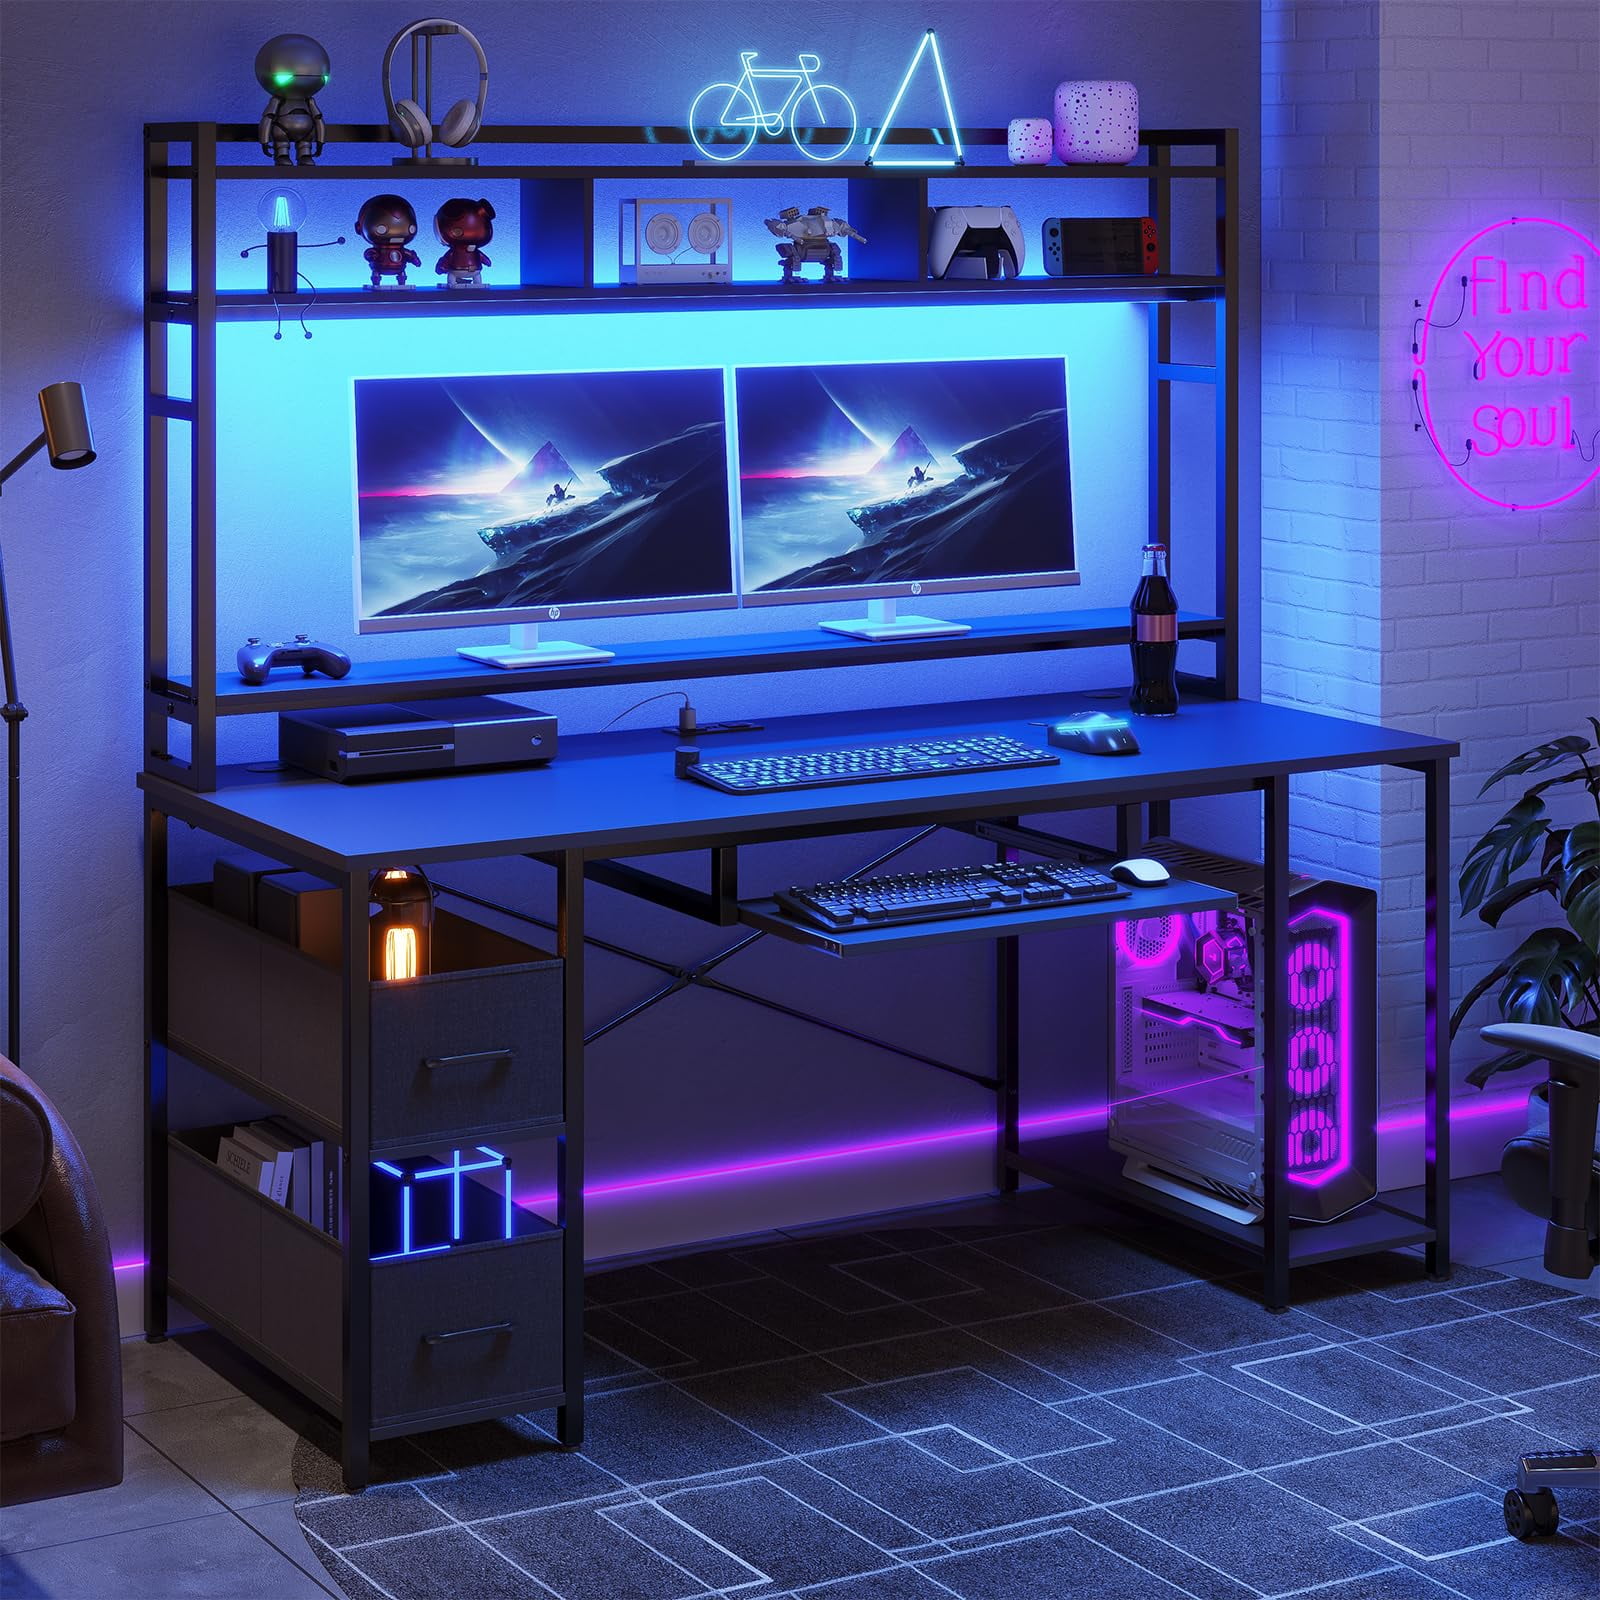 Cheap Black Computer Gaming Desk with Bookshelf&LED Lights&Power Outlet,55 inches Home Office PC Table Workstation for Study Room with 2 Drawers&Storage Shelves